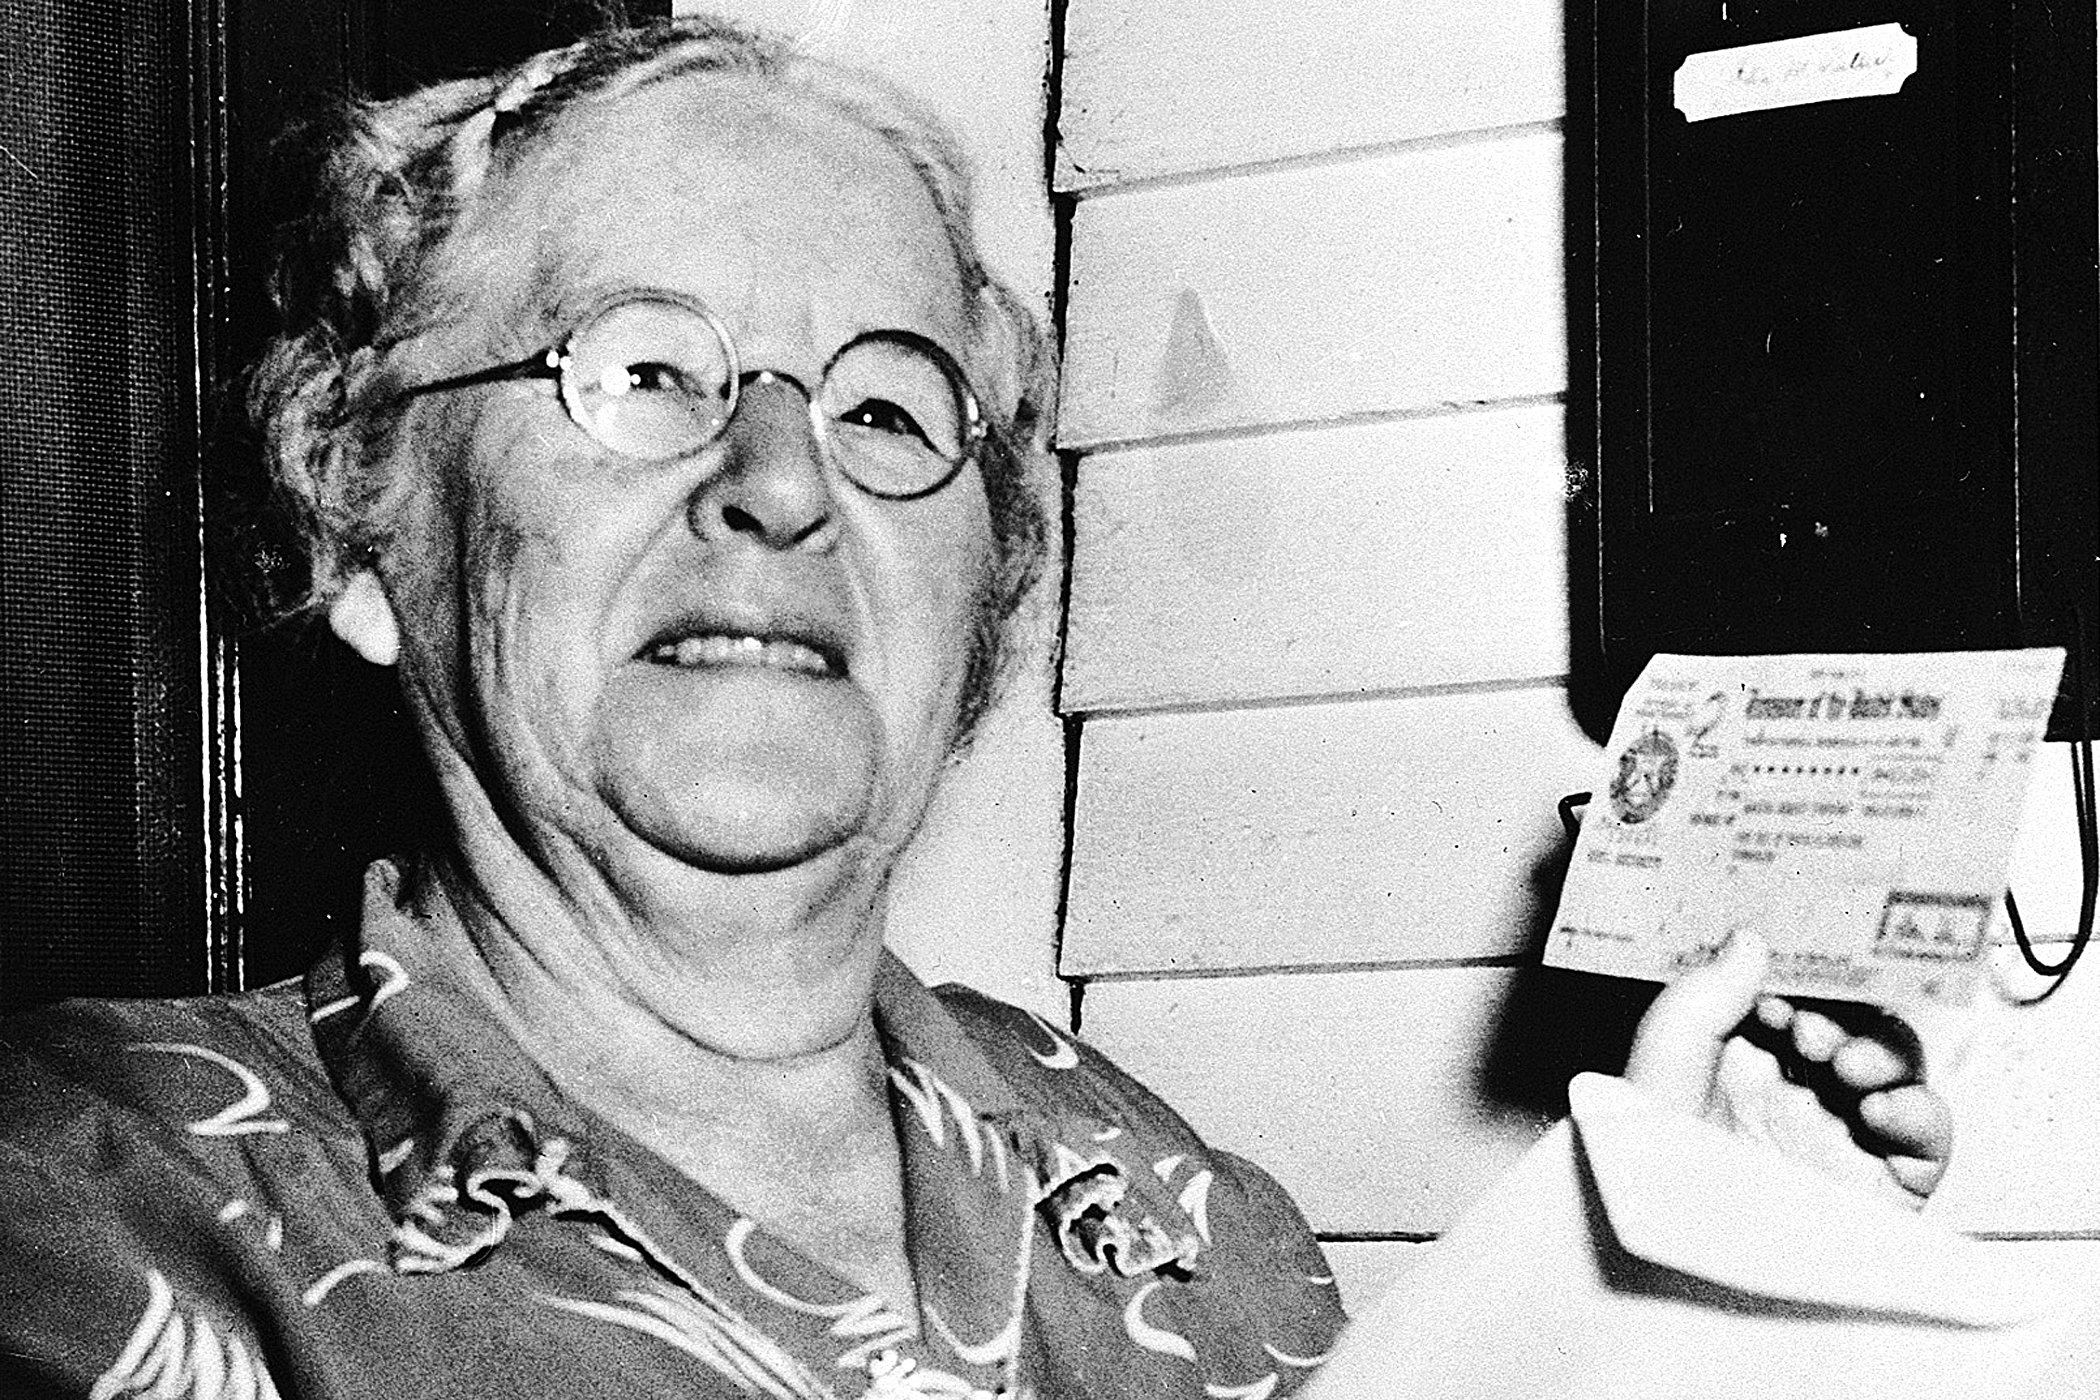 Why You Should Celebrate Social Security's 75th Anniversary